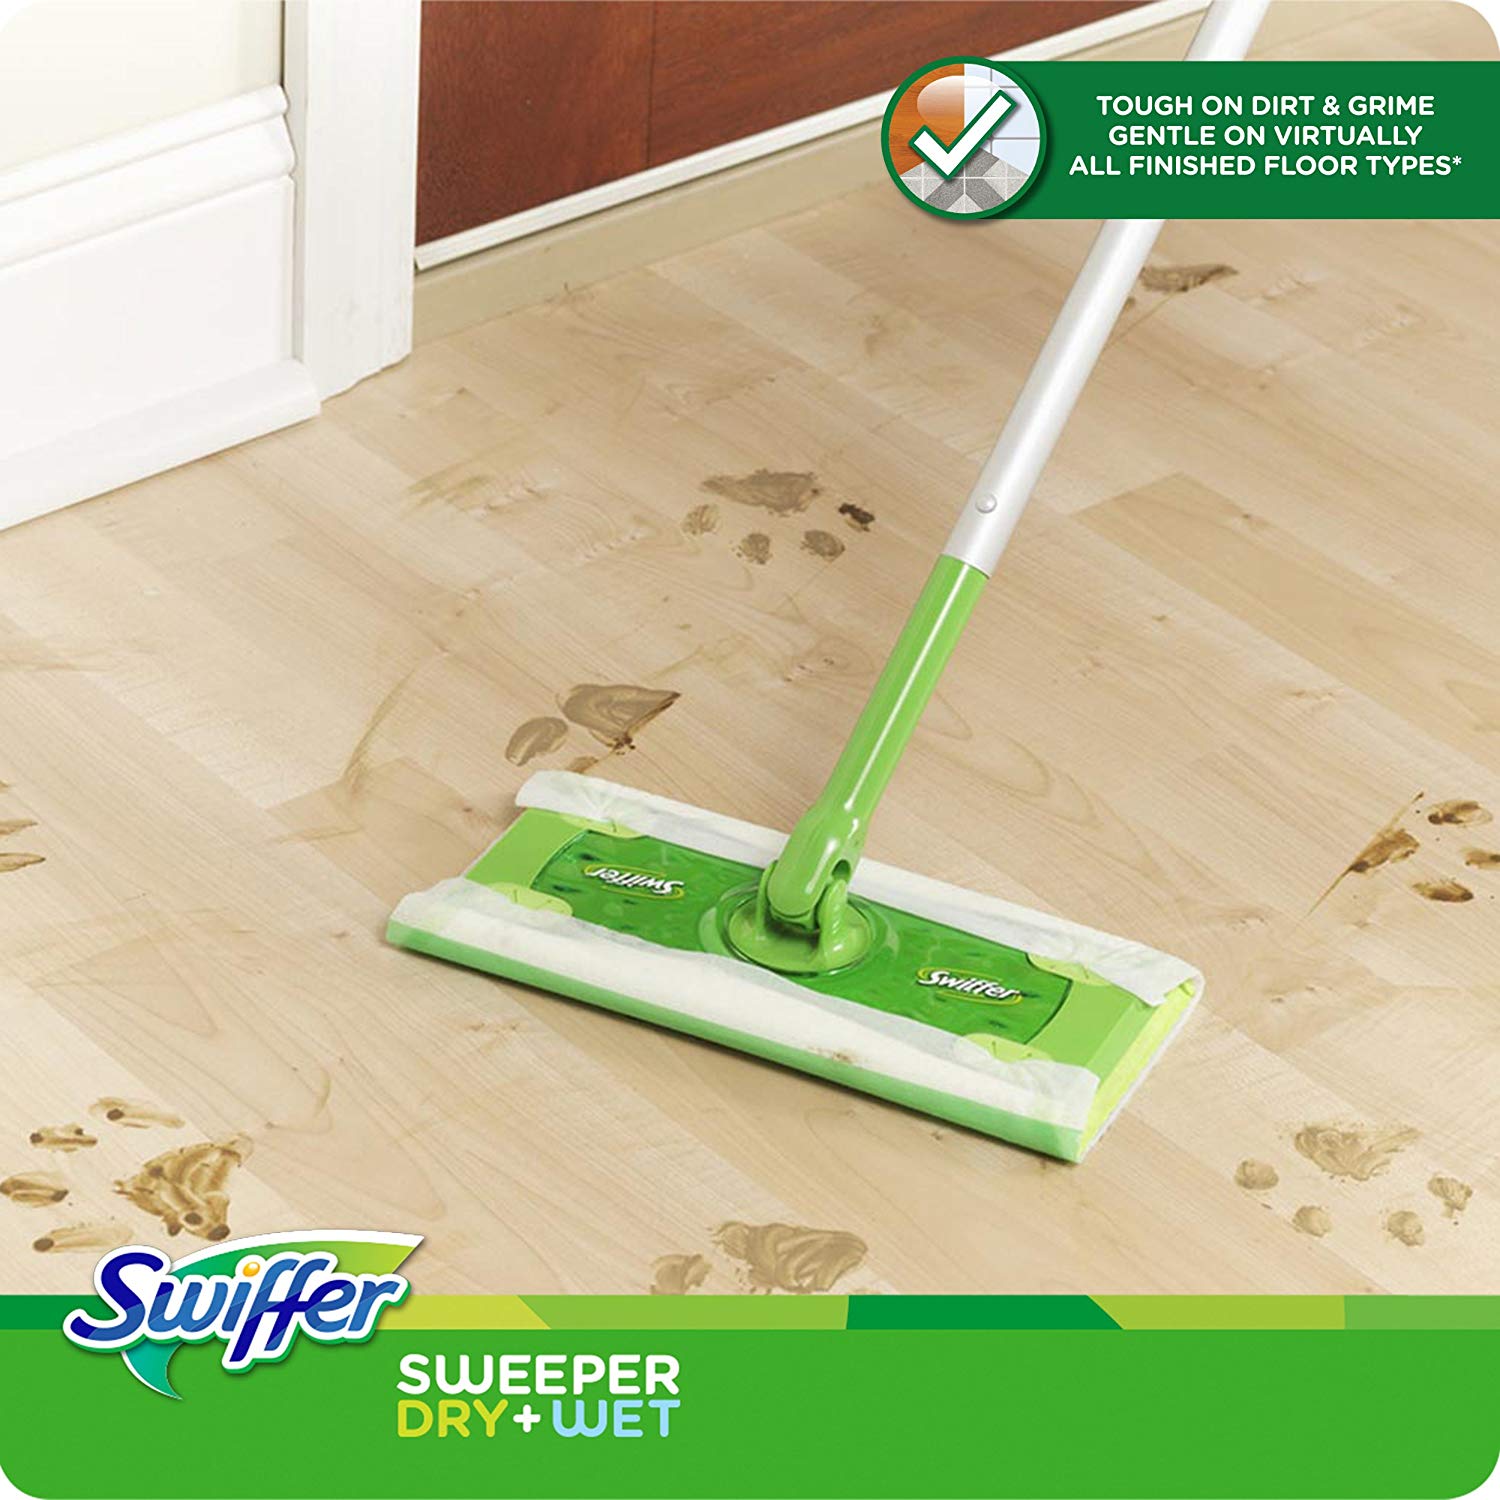 Swiffer Sweeper cleaner dry and wet mop starter kit for $8